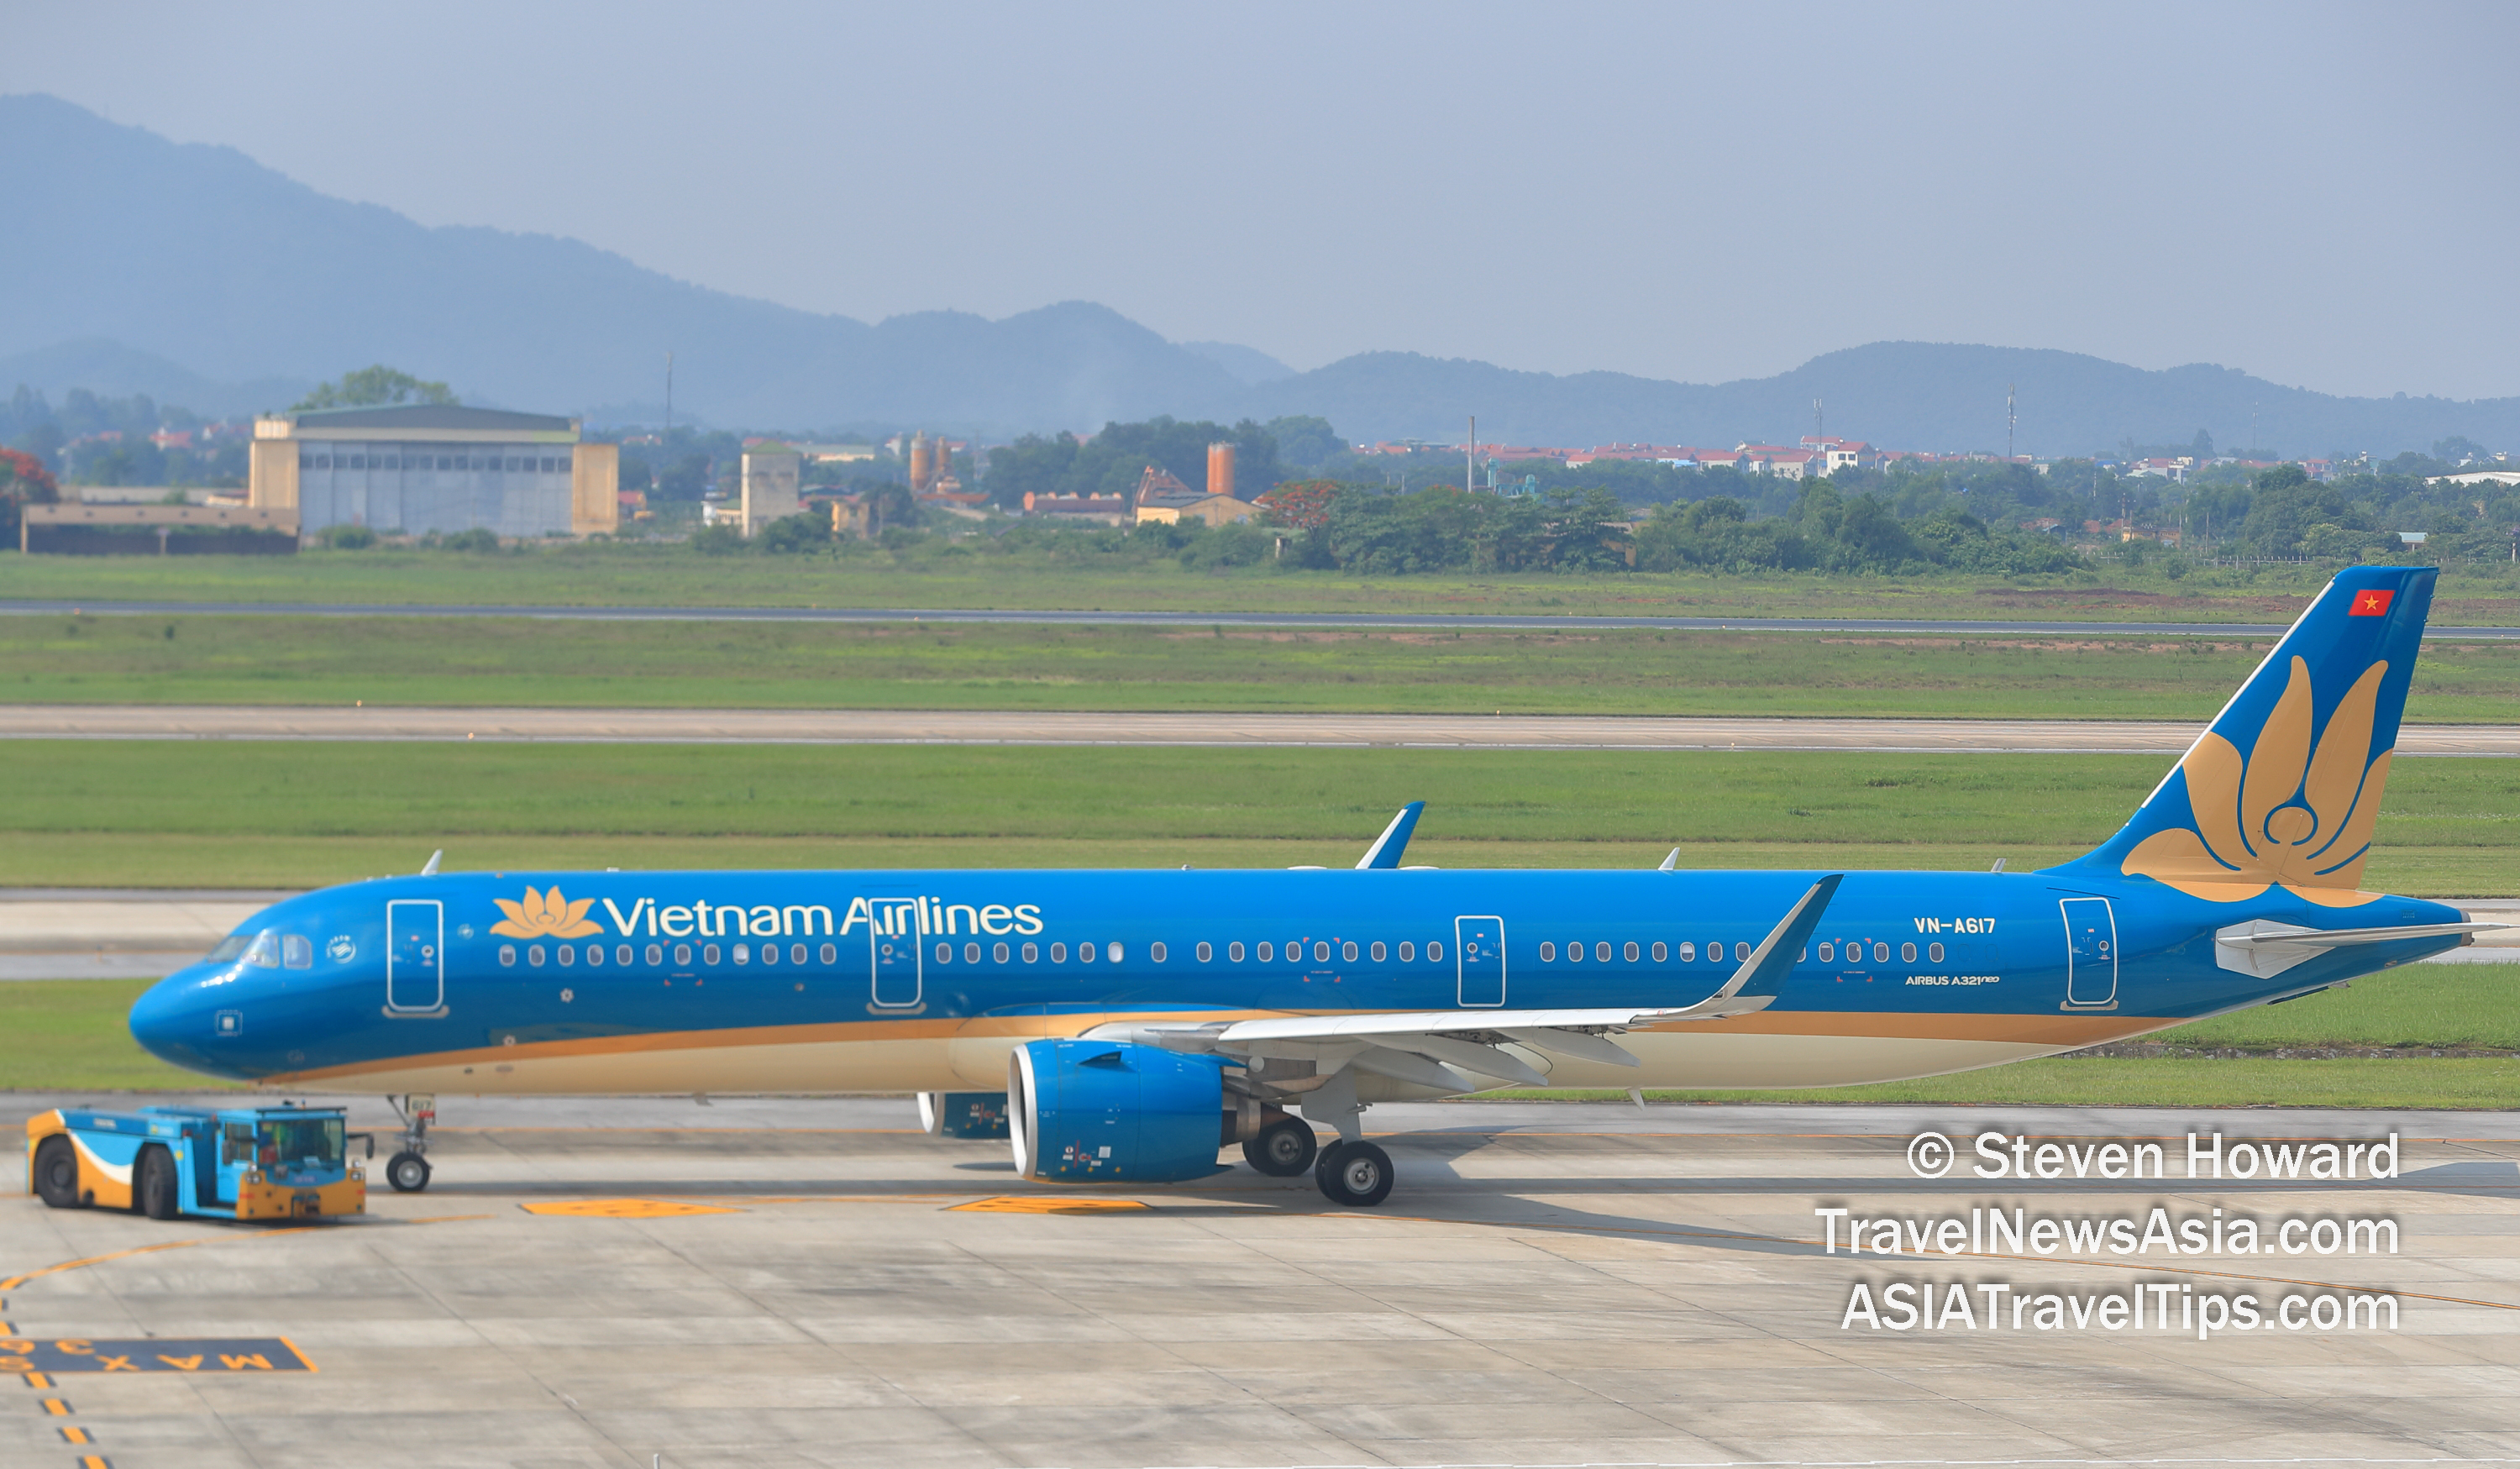 Vietnam Airlines A321neo reg: VNA617. Picture by Steven Howard of TravelNewsAsia.com Click to enlarge.